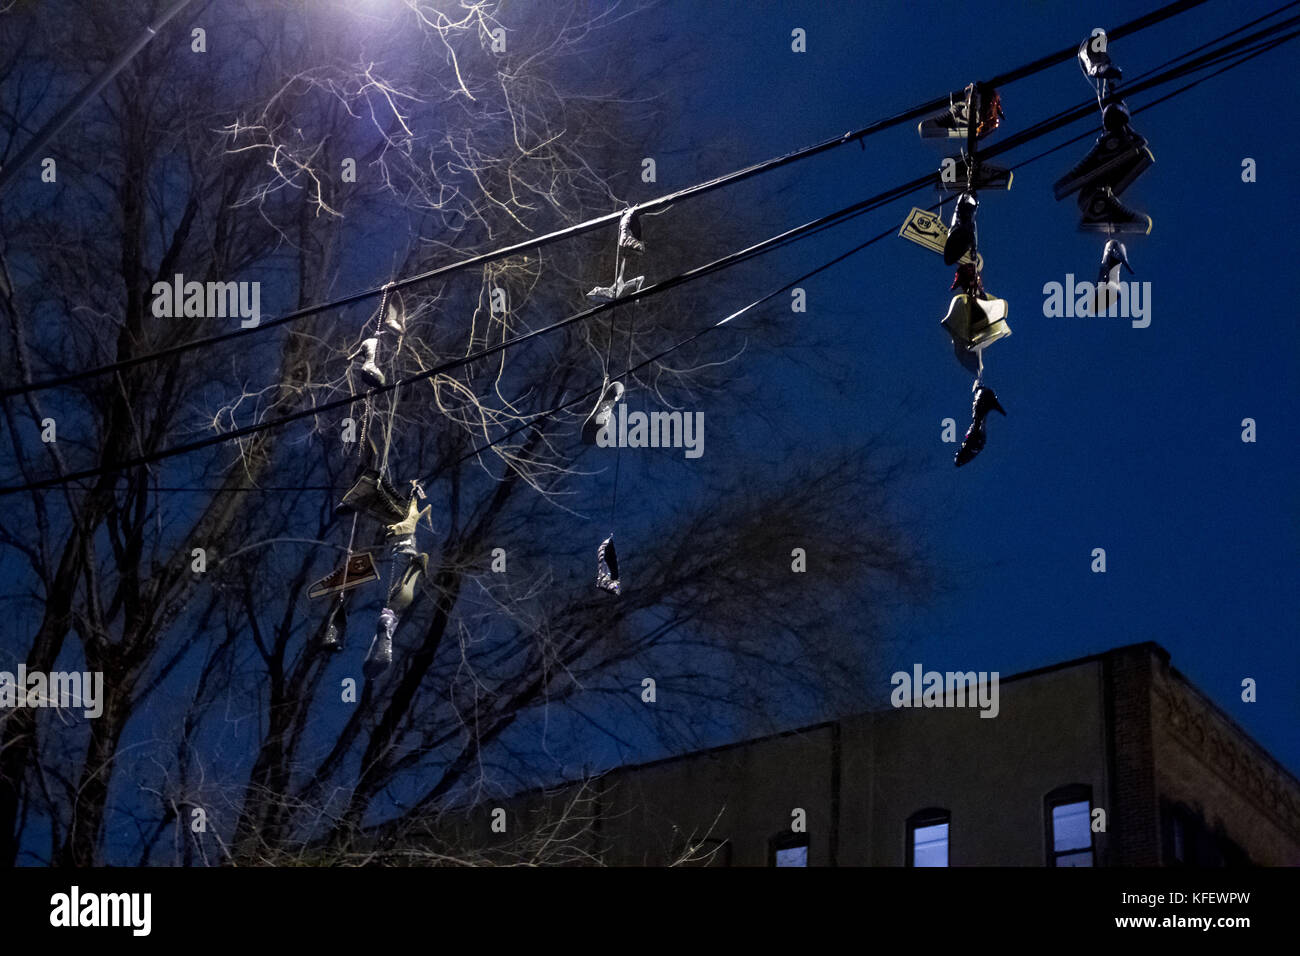 shoes hanging on telephone cables Stock Photo